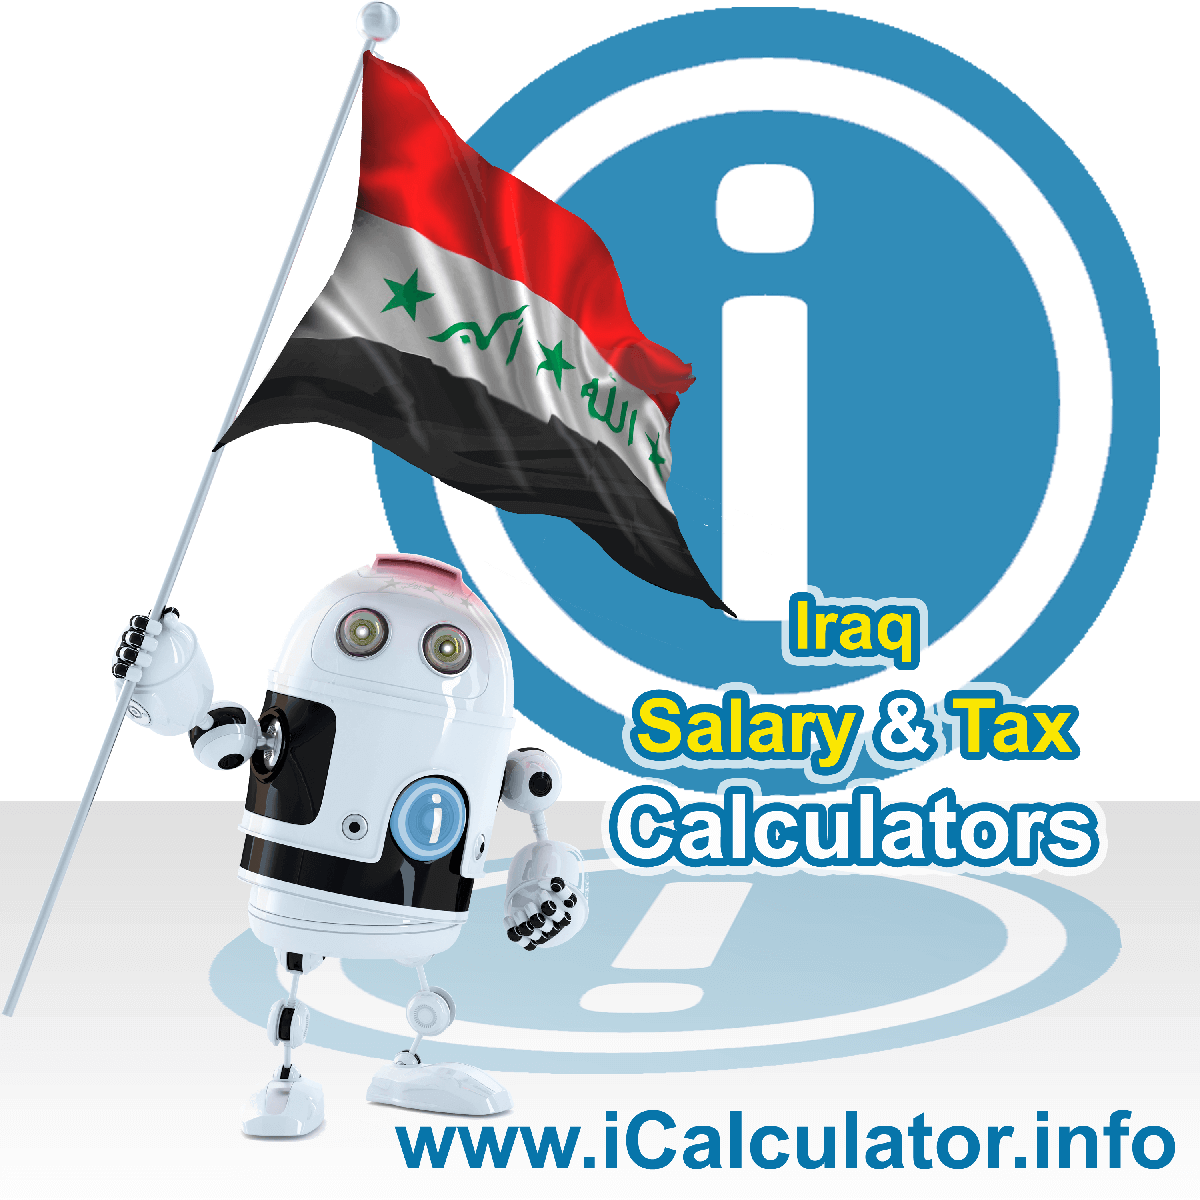 Iraq Salary Calculator. This image shows the Iraqese flag and information relating to the tax formula for the Iraq Tax Calculator